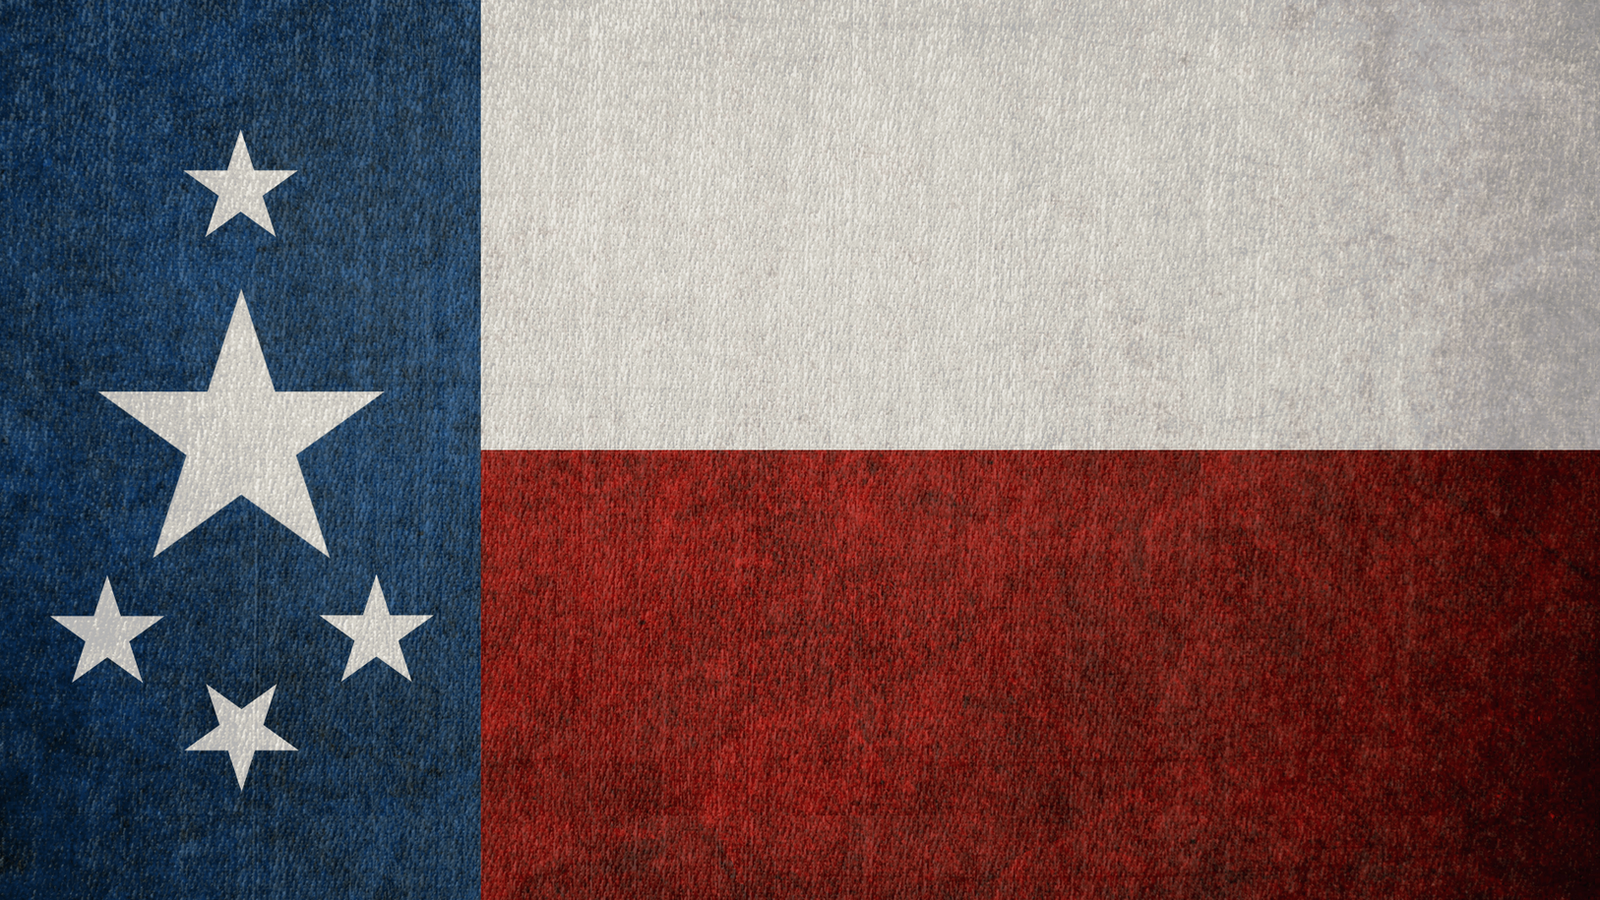 fallout__flag_of_the_texas_commonwealth_by_okiir-d8x47sx.png